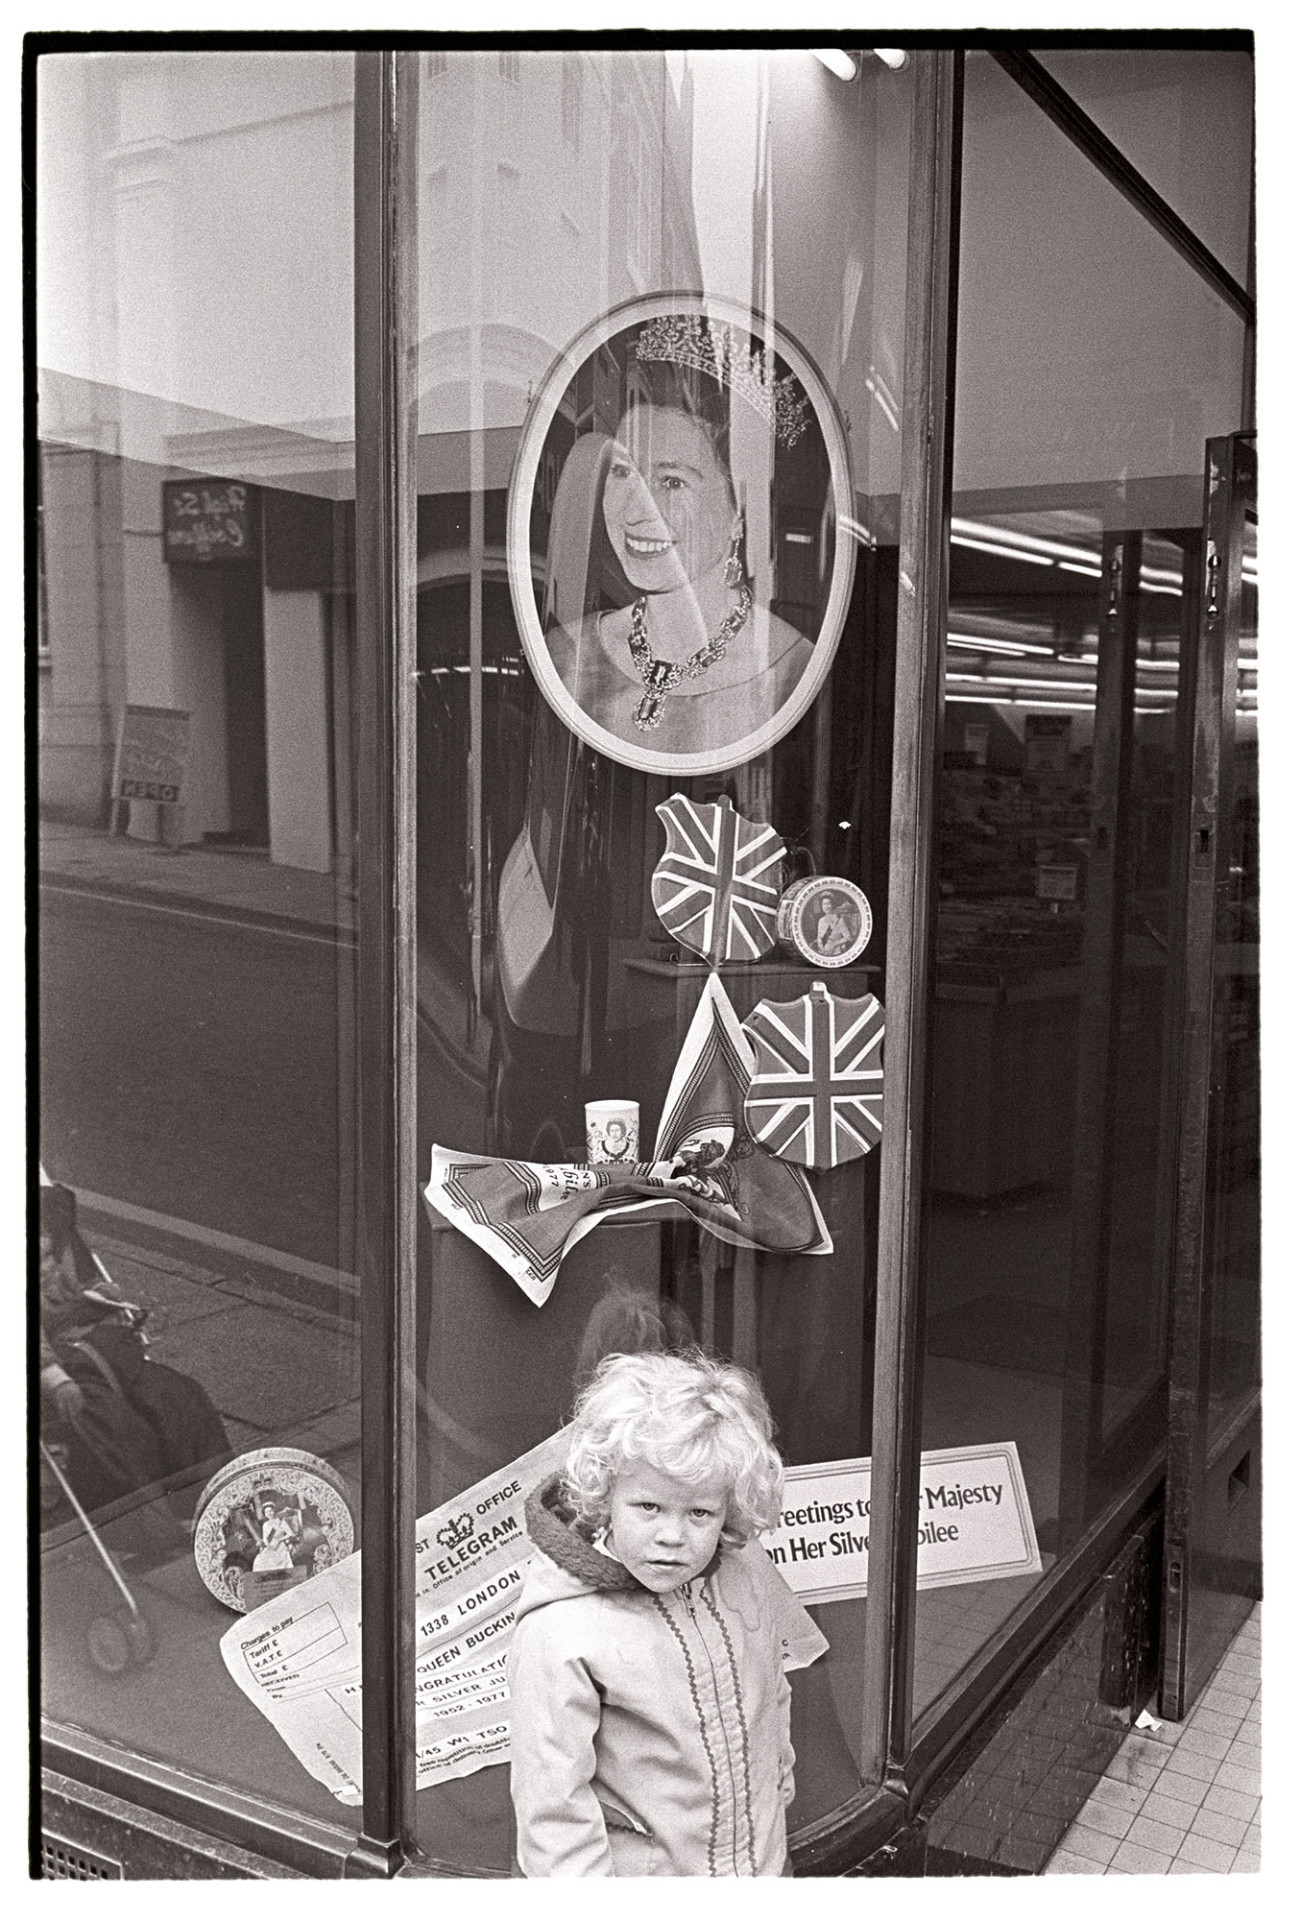 Girl outside shop with display for Jubilee.
[The shop window of F W Woolworths in Bideford High Street decorated for Queen Elizabeth II's Silver Jubilee.  A child is standing by the window.]